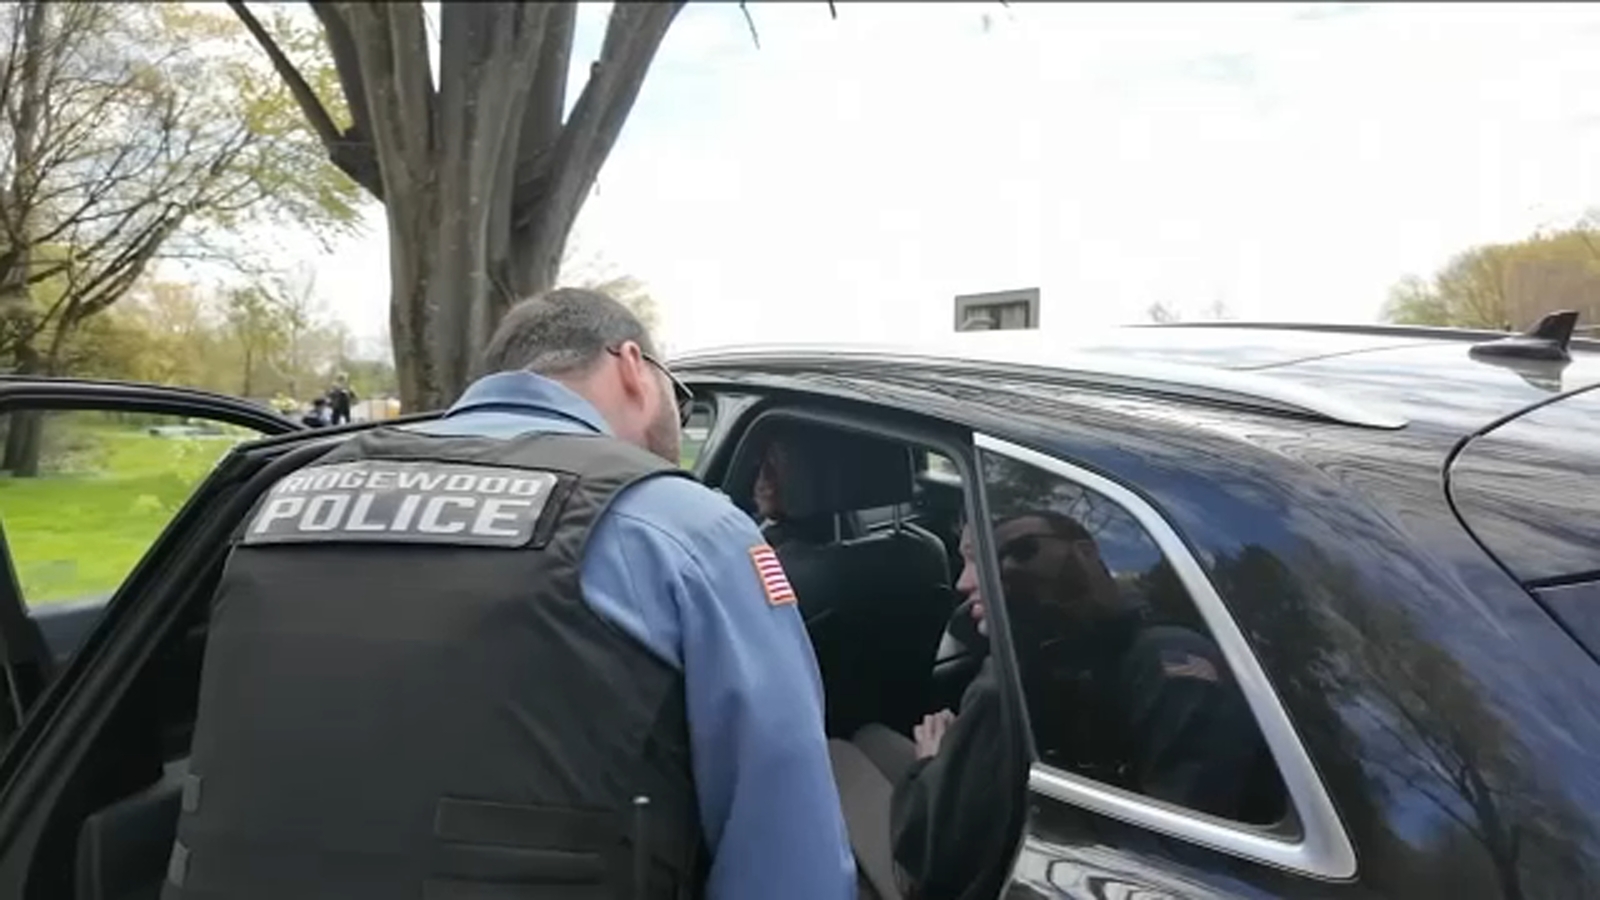 Autism Acceptance Month: JoyDew’s simulation helps Ridgewood police better handle encounters with people on the spectrum [Video]